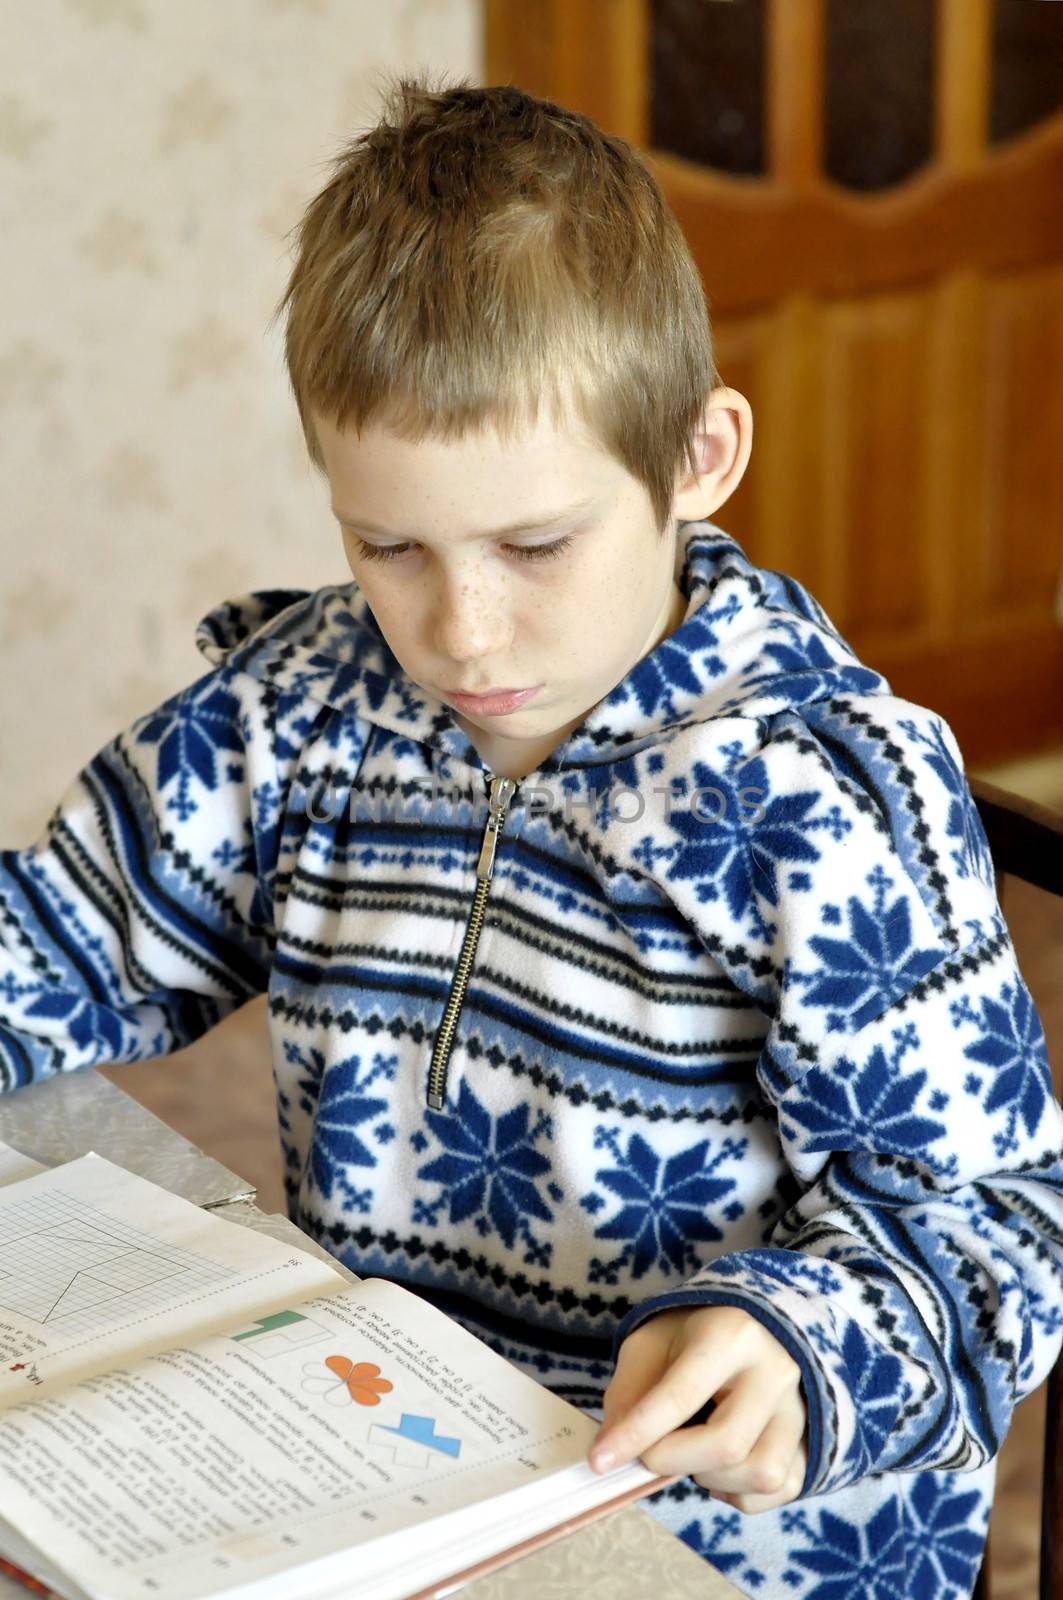 The 10-year-old boy sits with the textbook, doing homework